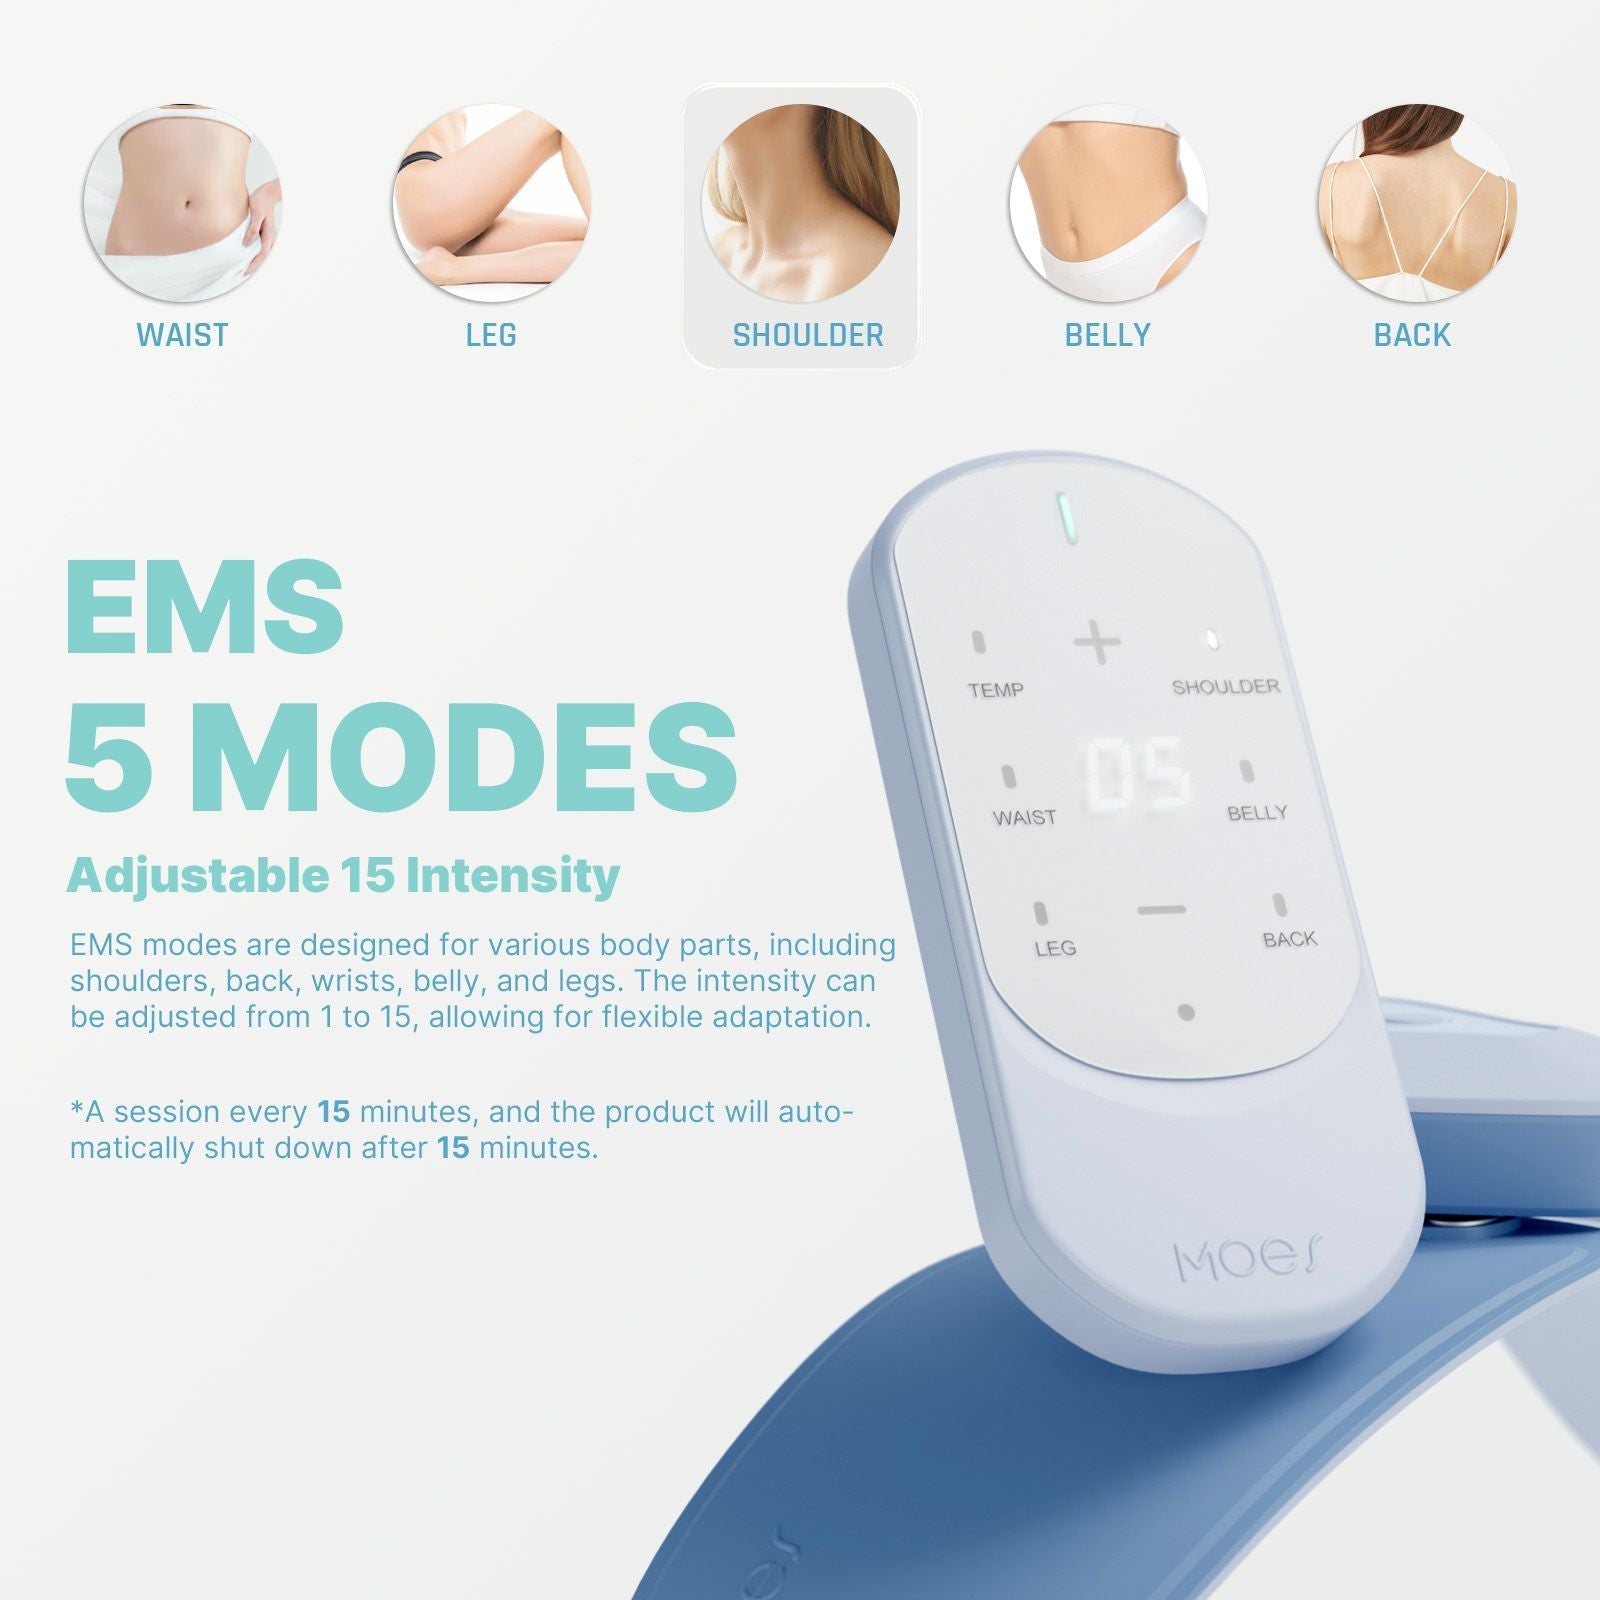 Portable Wireless TENS with Heat for Menstrual/Back/Shoulder/Neck/Leg Pain Relief - MOES